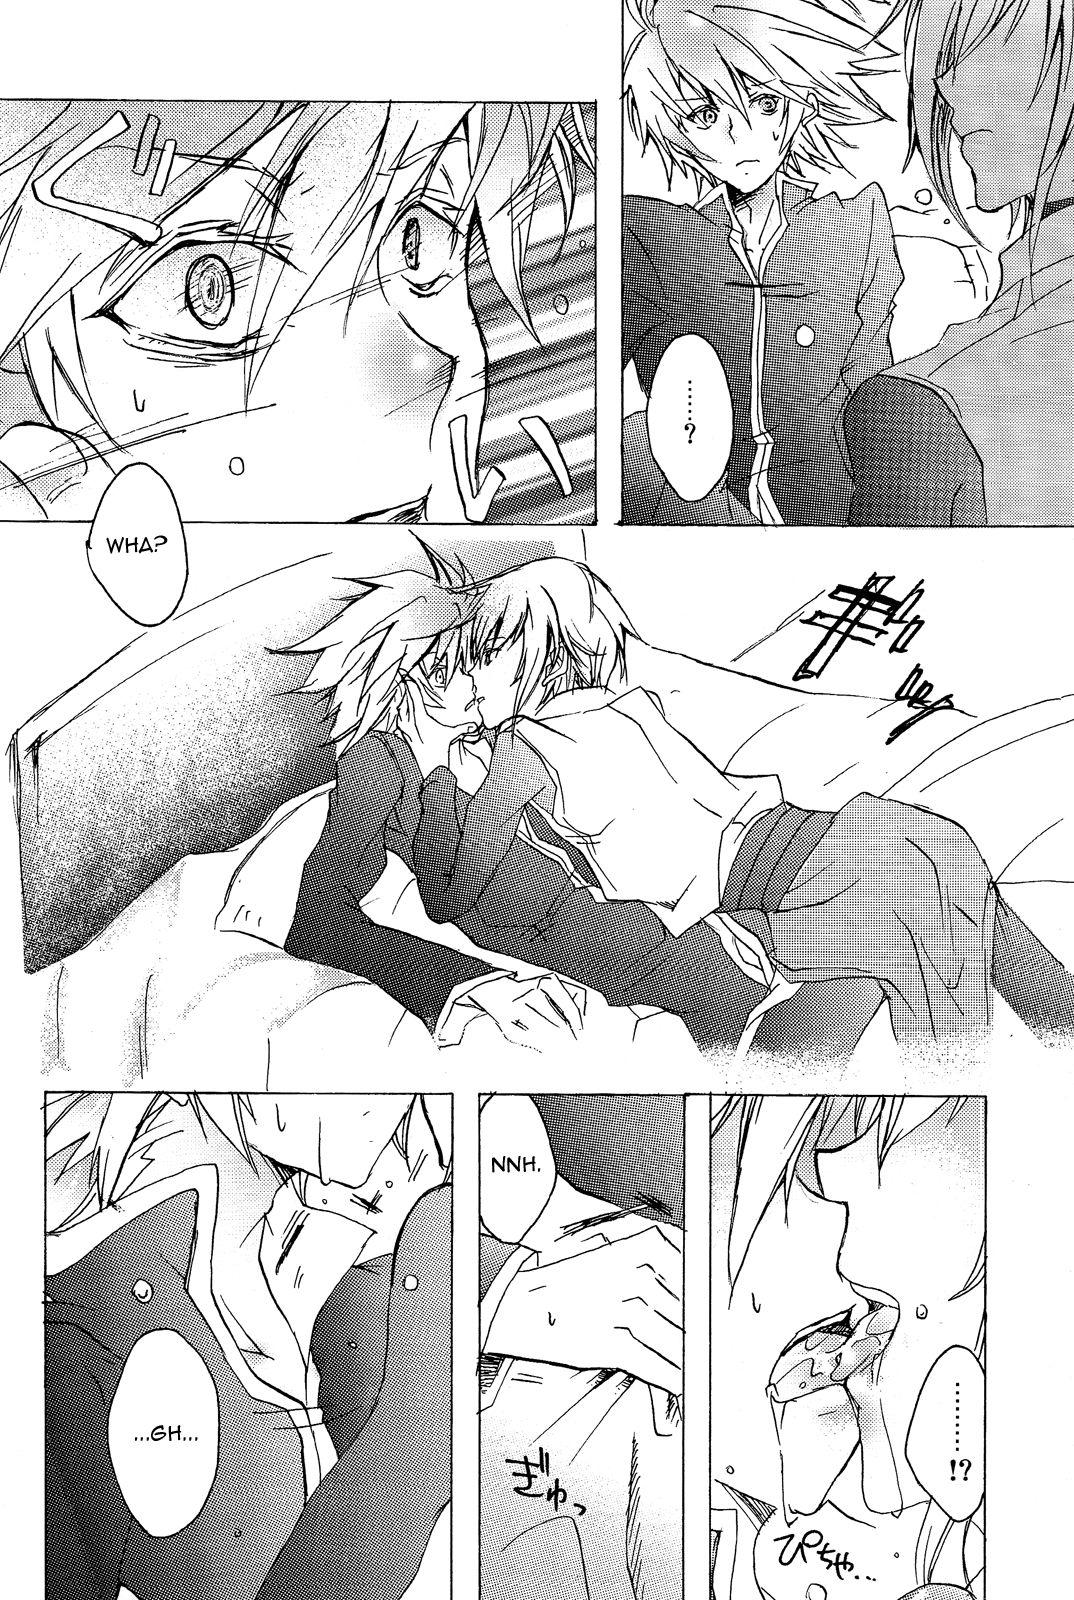 Gay 3some Shikarubeki Soukan | Love is a Many Splendored Thing - Blazblue Fist - Page 11